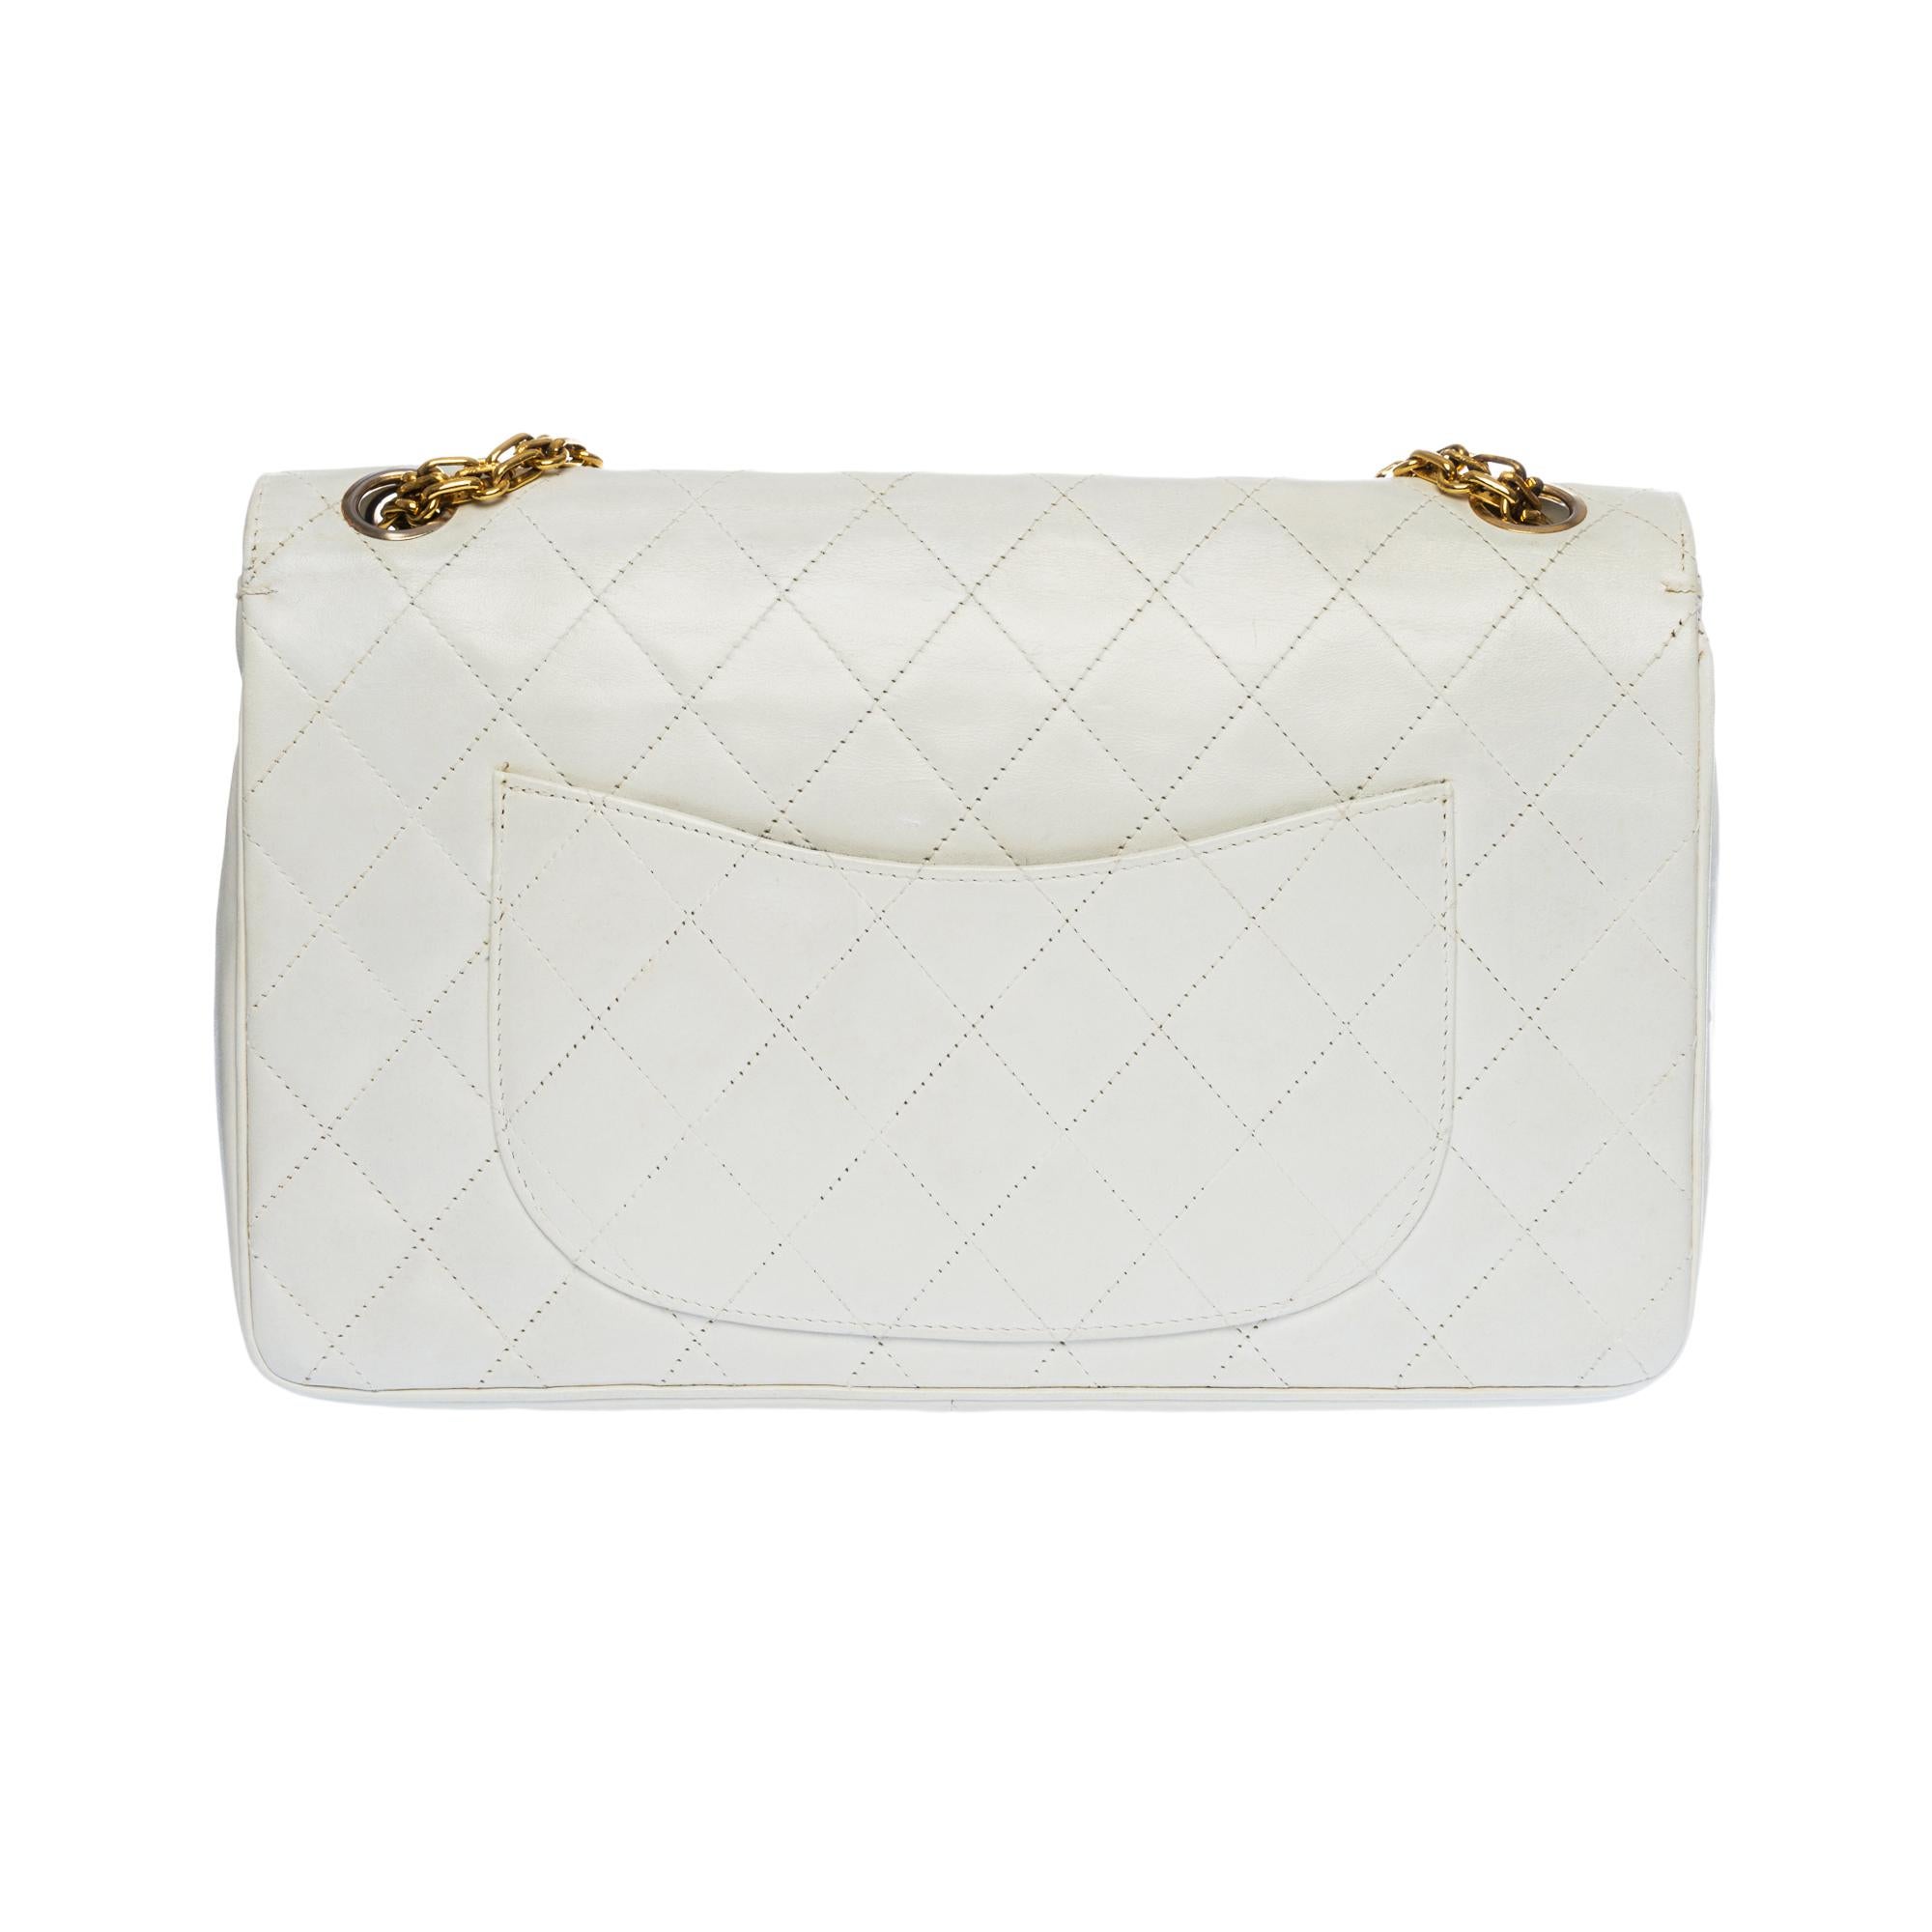 Beautiful Chanel Timeless/Classique handbag with double flap in white quilted lambskin leather, gold metal hardware, a Mademoiselle chain handle in gold metal allowing a hand or shoulder support
Closure with gold metal flap
A patch pocket on the